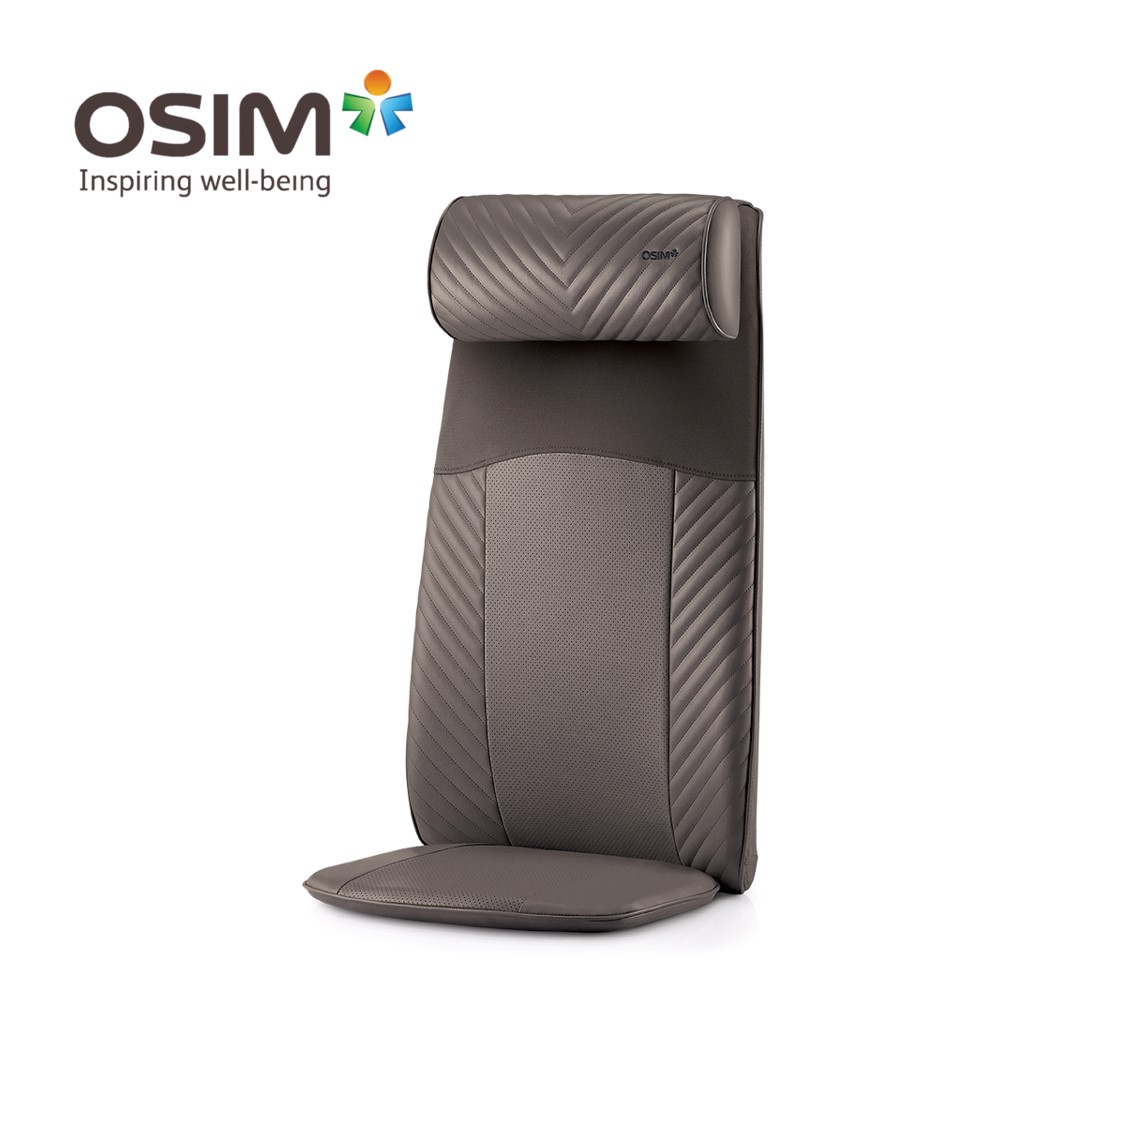 OSIM uJolly (Grey) Back Massager *Online Exclusive Only*